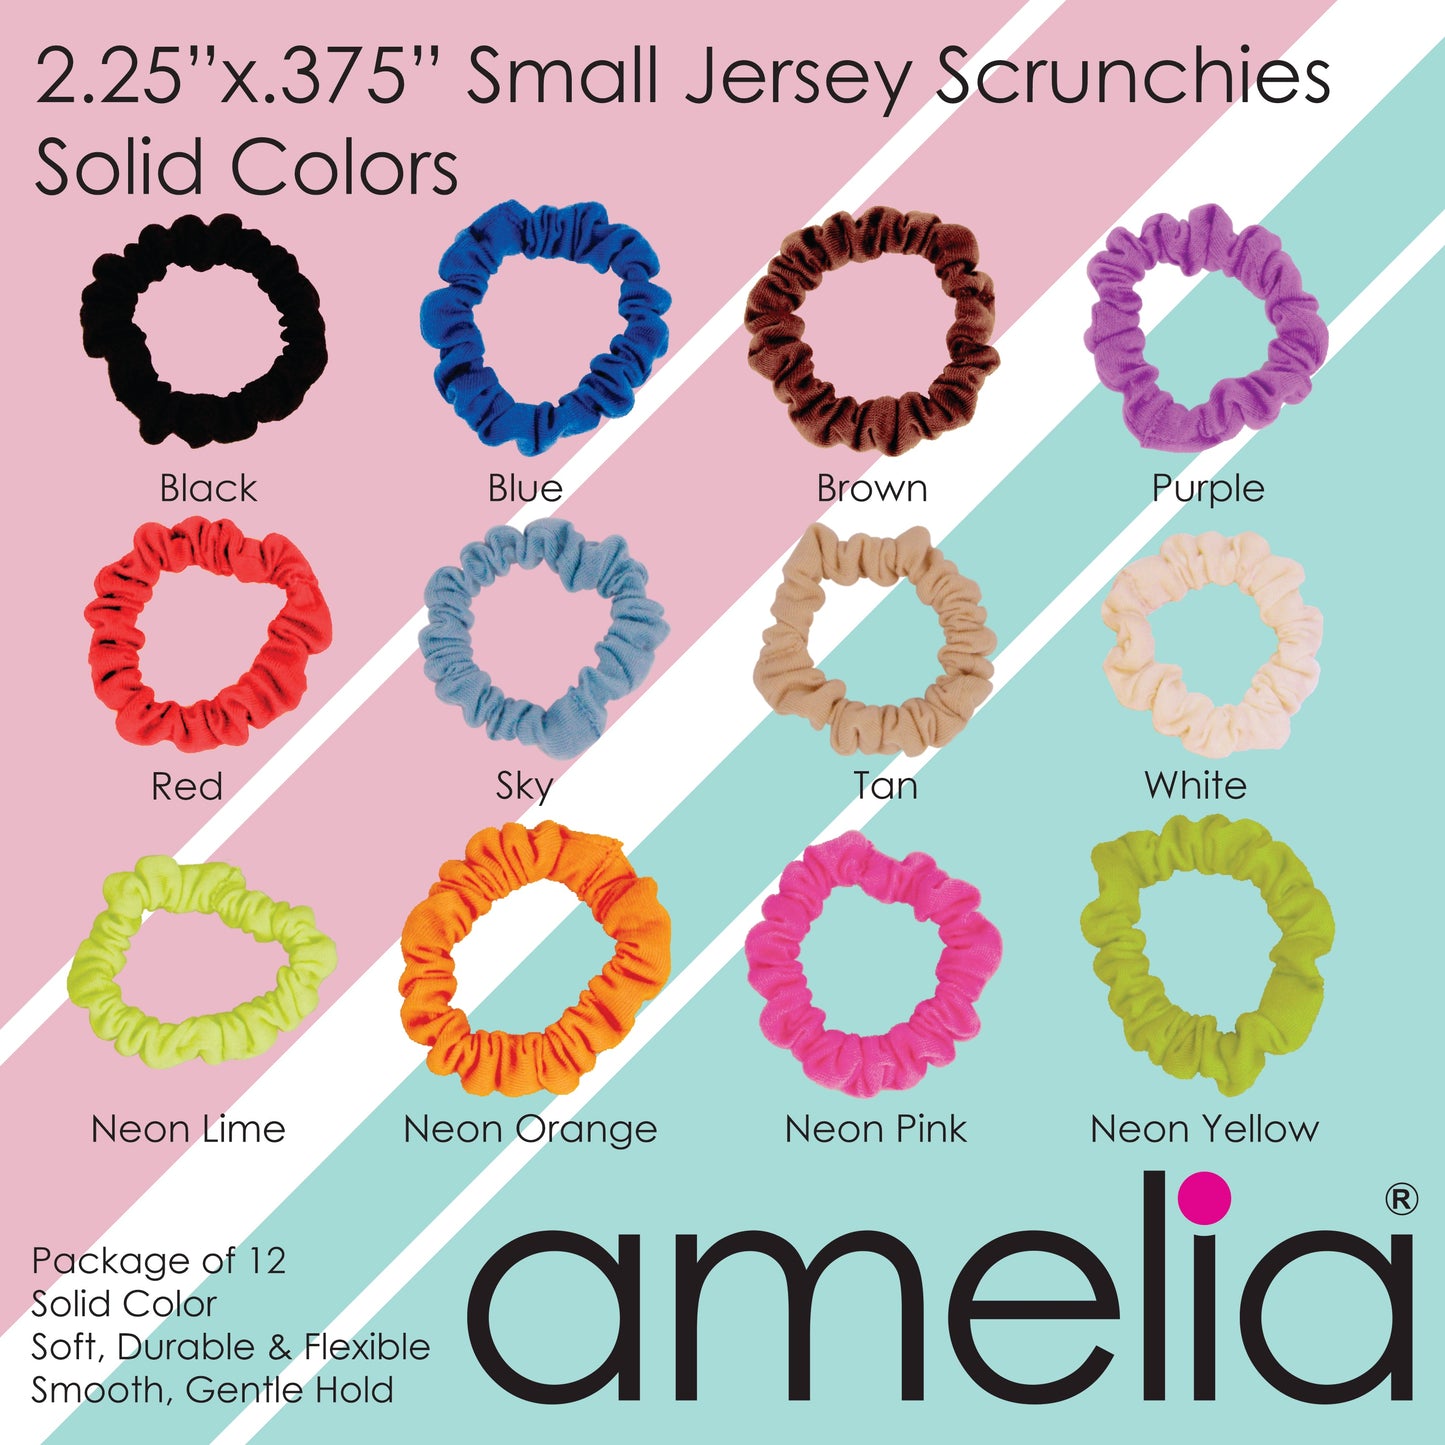 Amelia Beauty, Black/White Polka Dot Jersey Scrunchies, 2.25in Diameter, Gentle on Hair, Strong Hold, No Snag, No Dents or Creases. 12 Pack